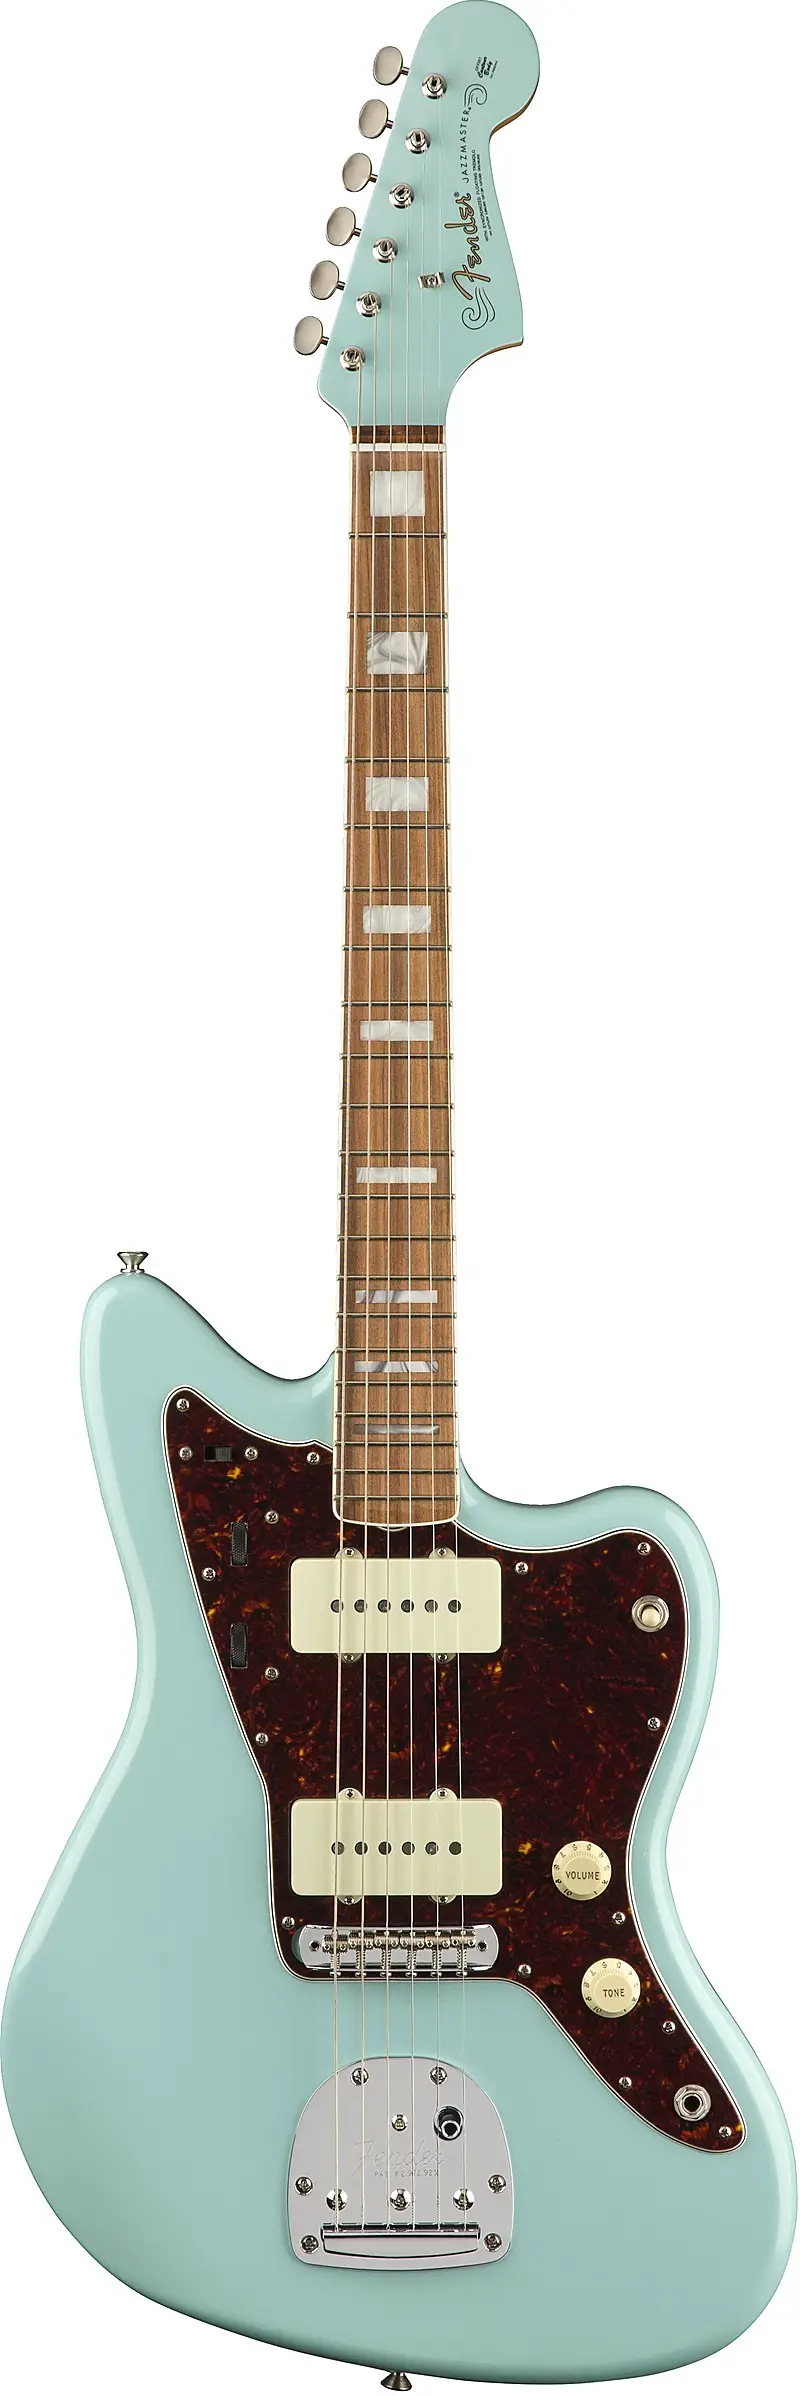 Limited Edition 60th Anniversary Classic Jazzmaster by Fender